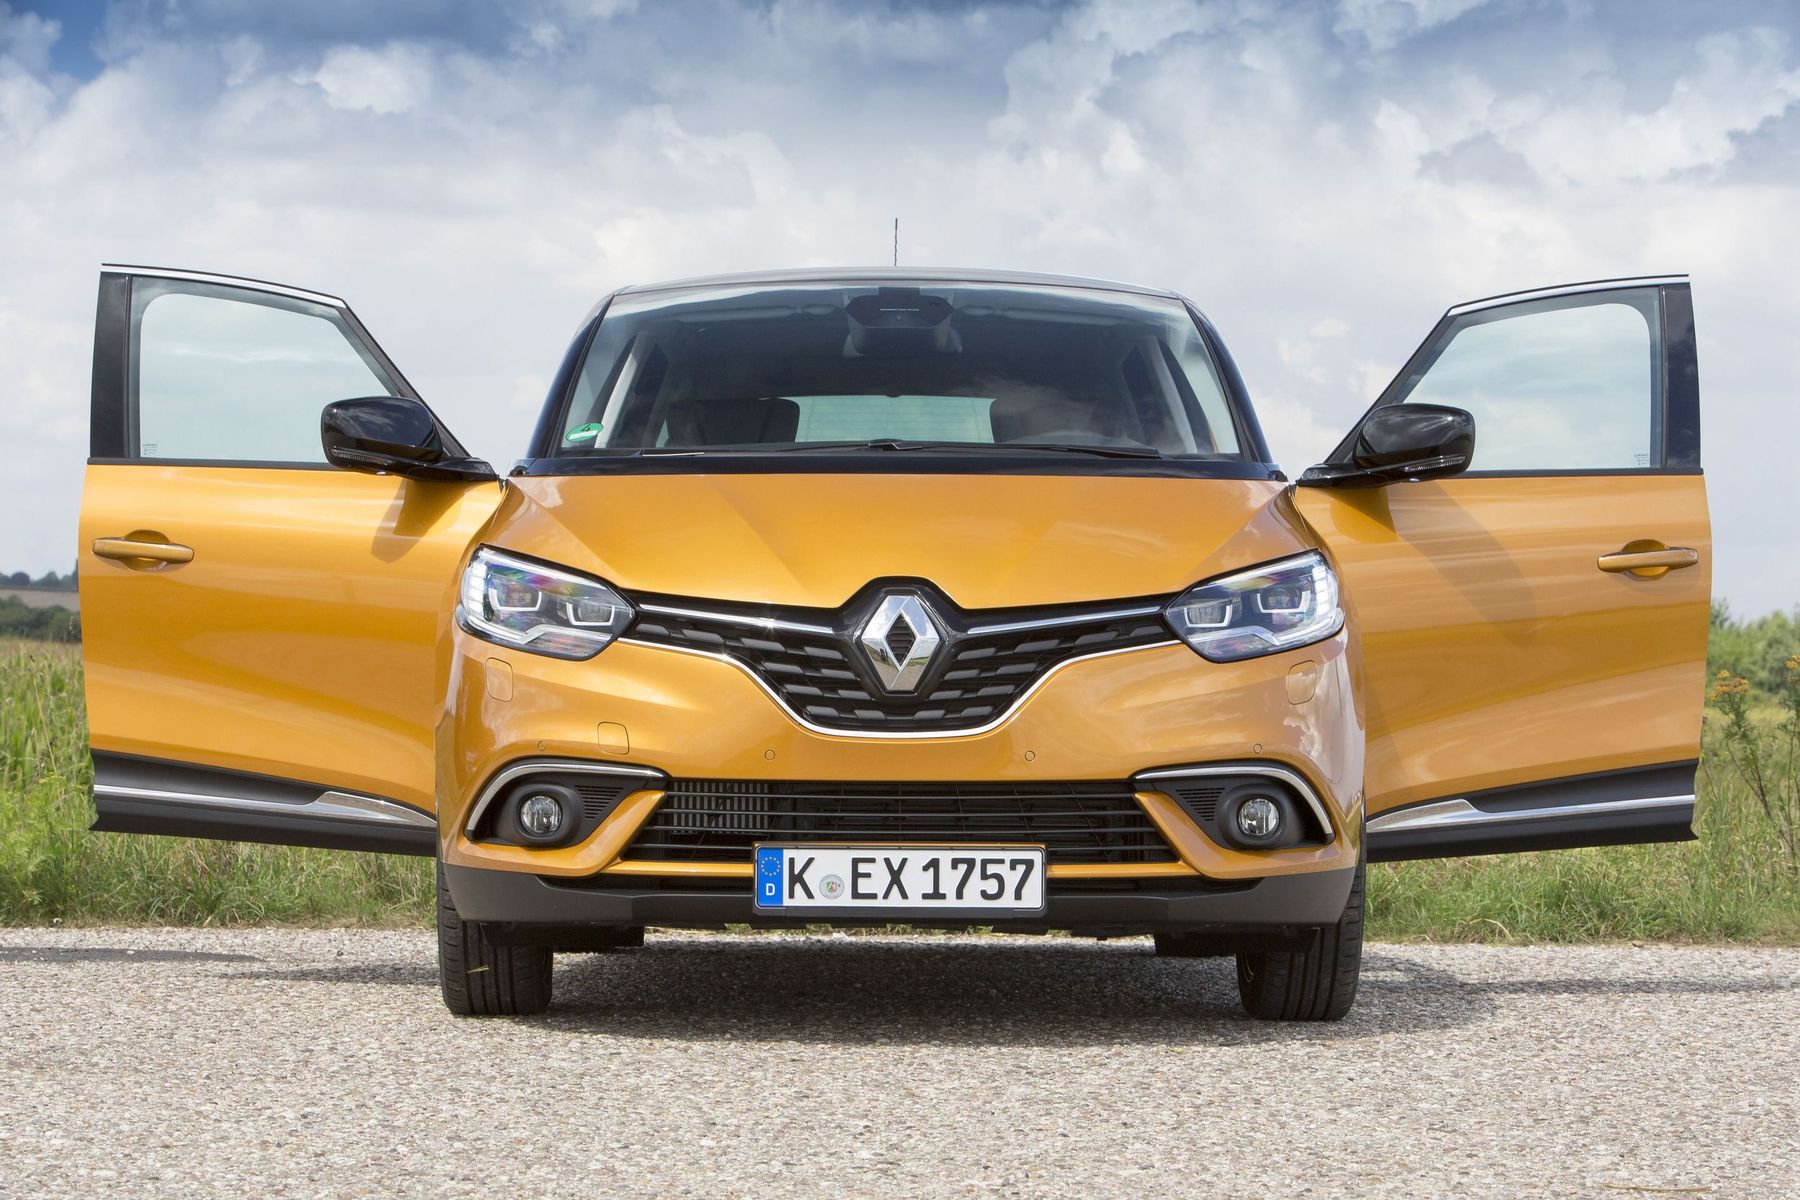 2024 Renault Captur Unveiled: Restyling A New Generation Small SUV !! 